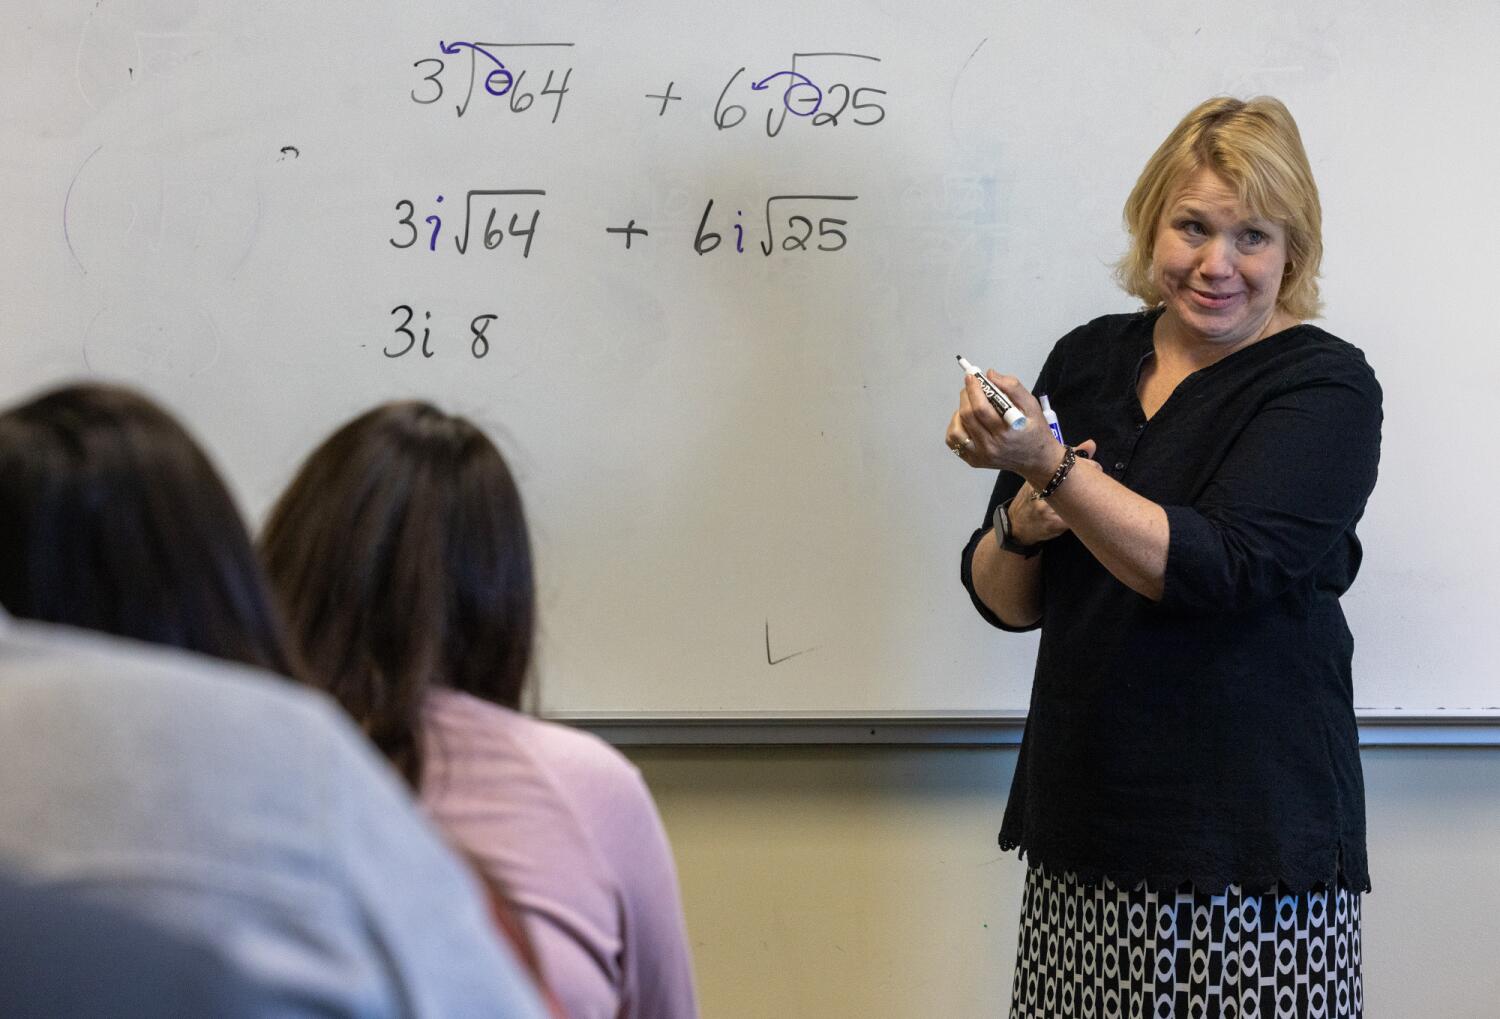 Editorial: Not every student needs algebra 2. UC should be flexible on math requirement